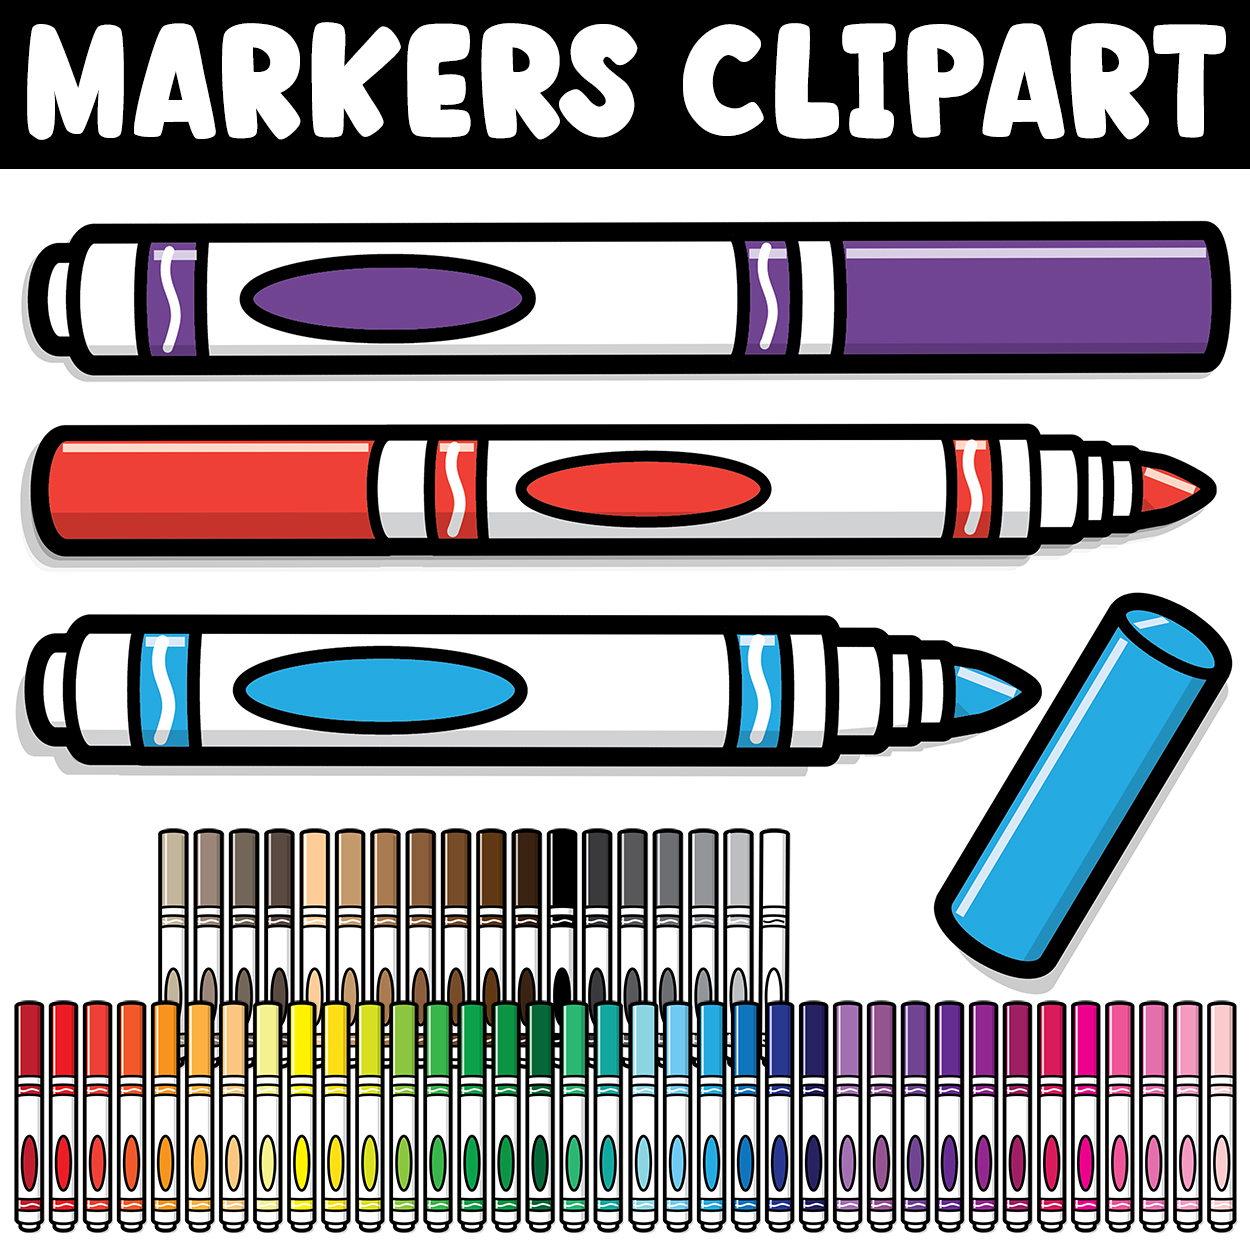 My Math Resources - Markers Clip Art